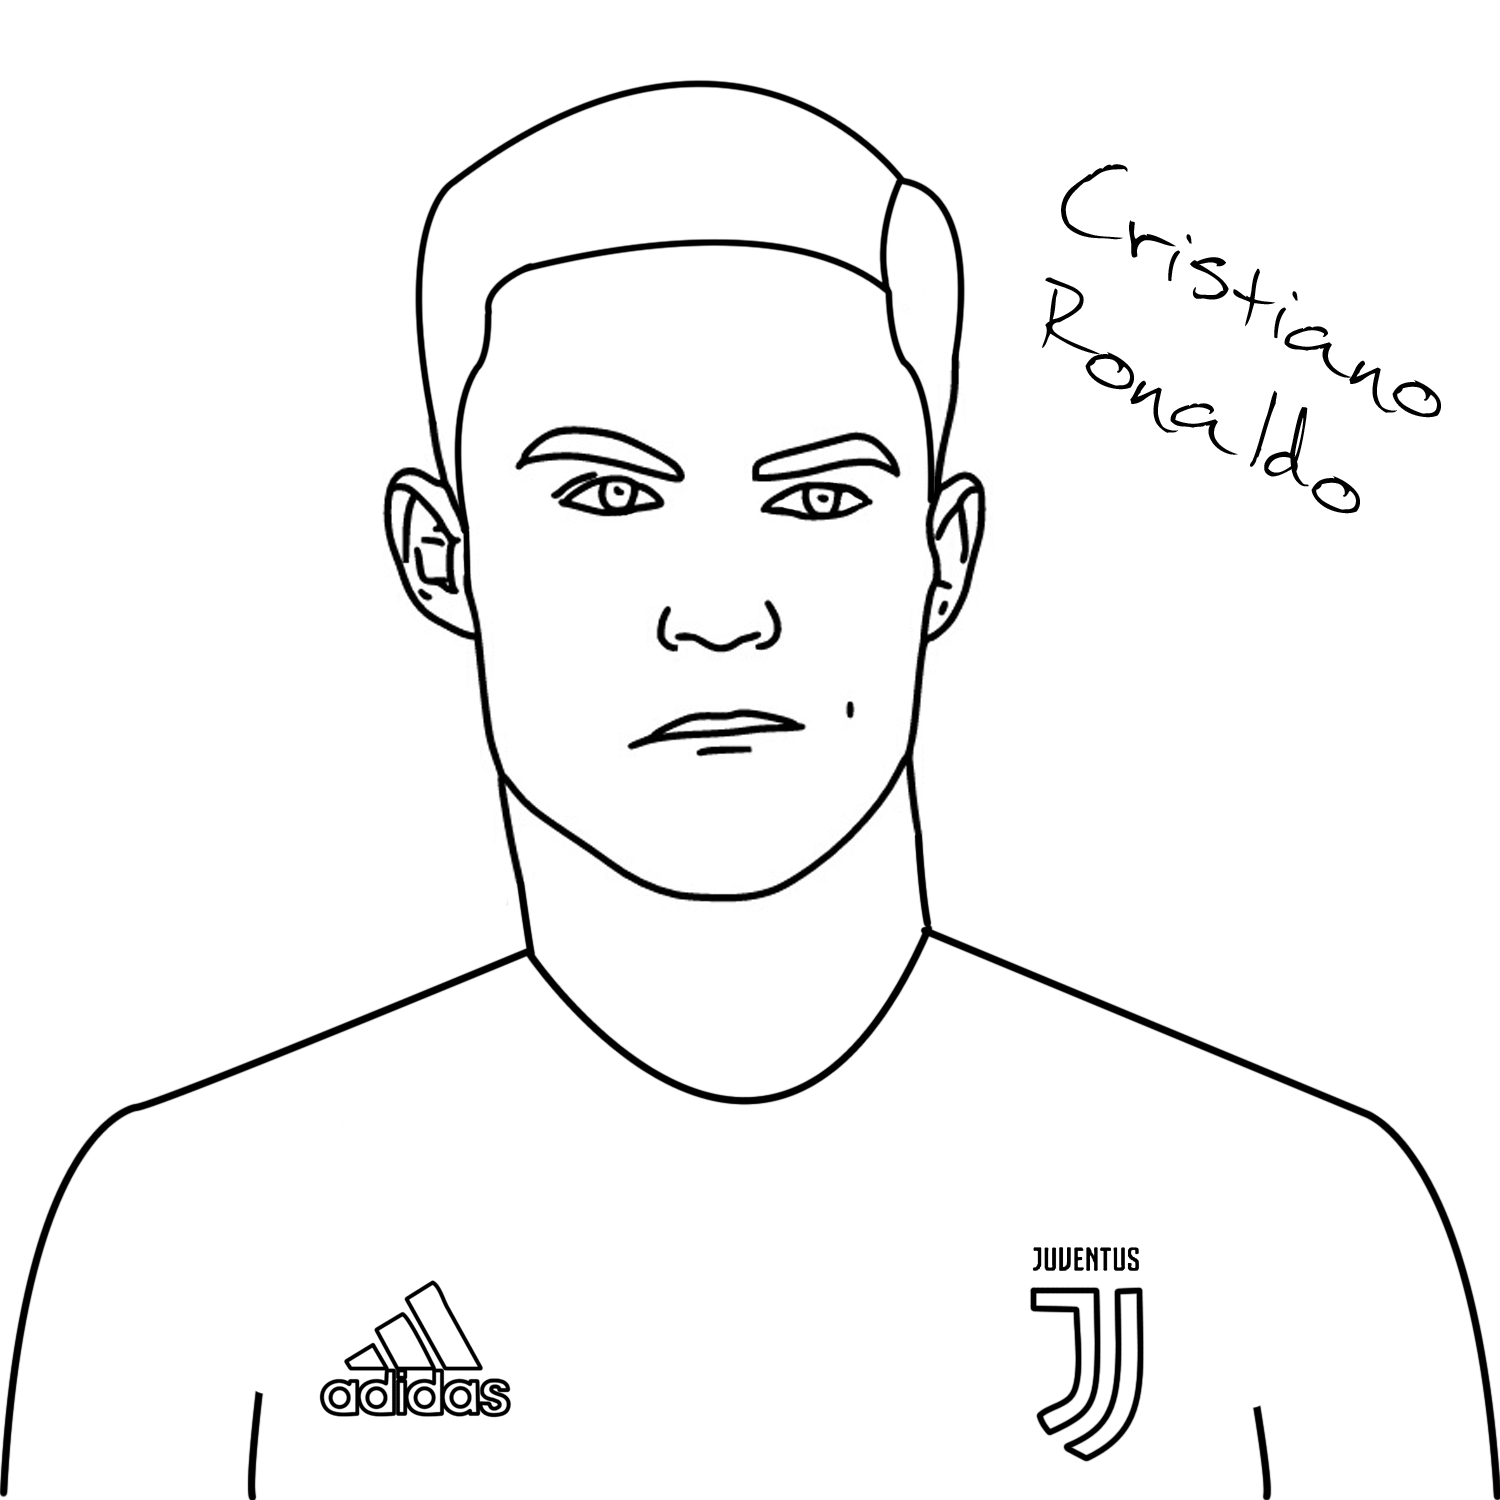 juventus cr7 coloring pages